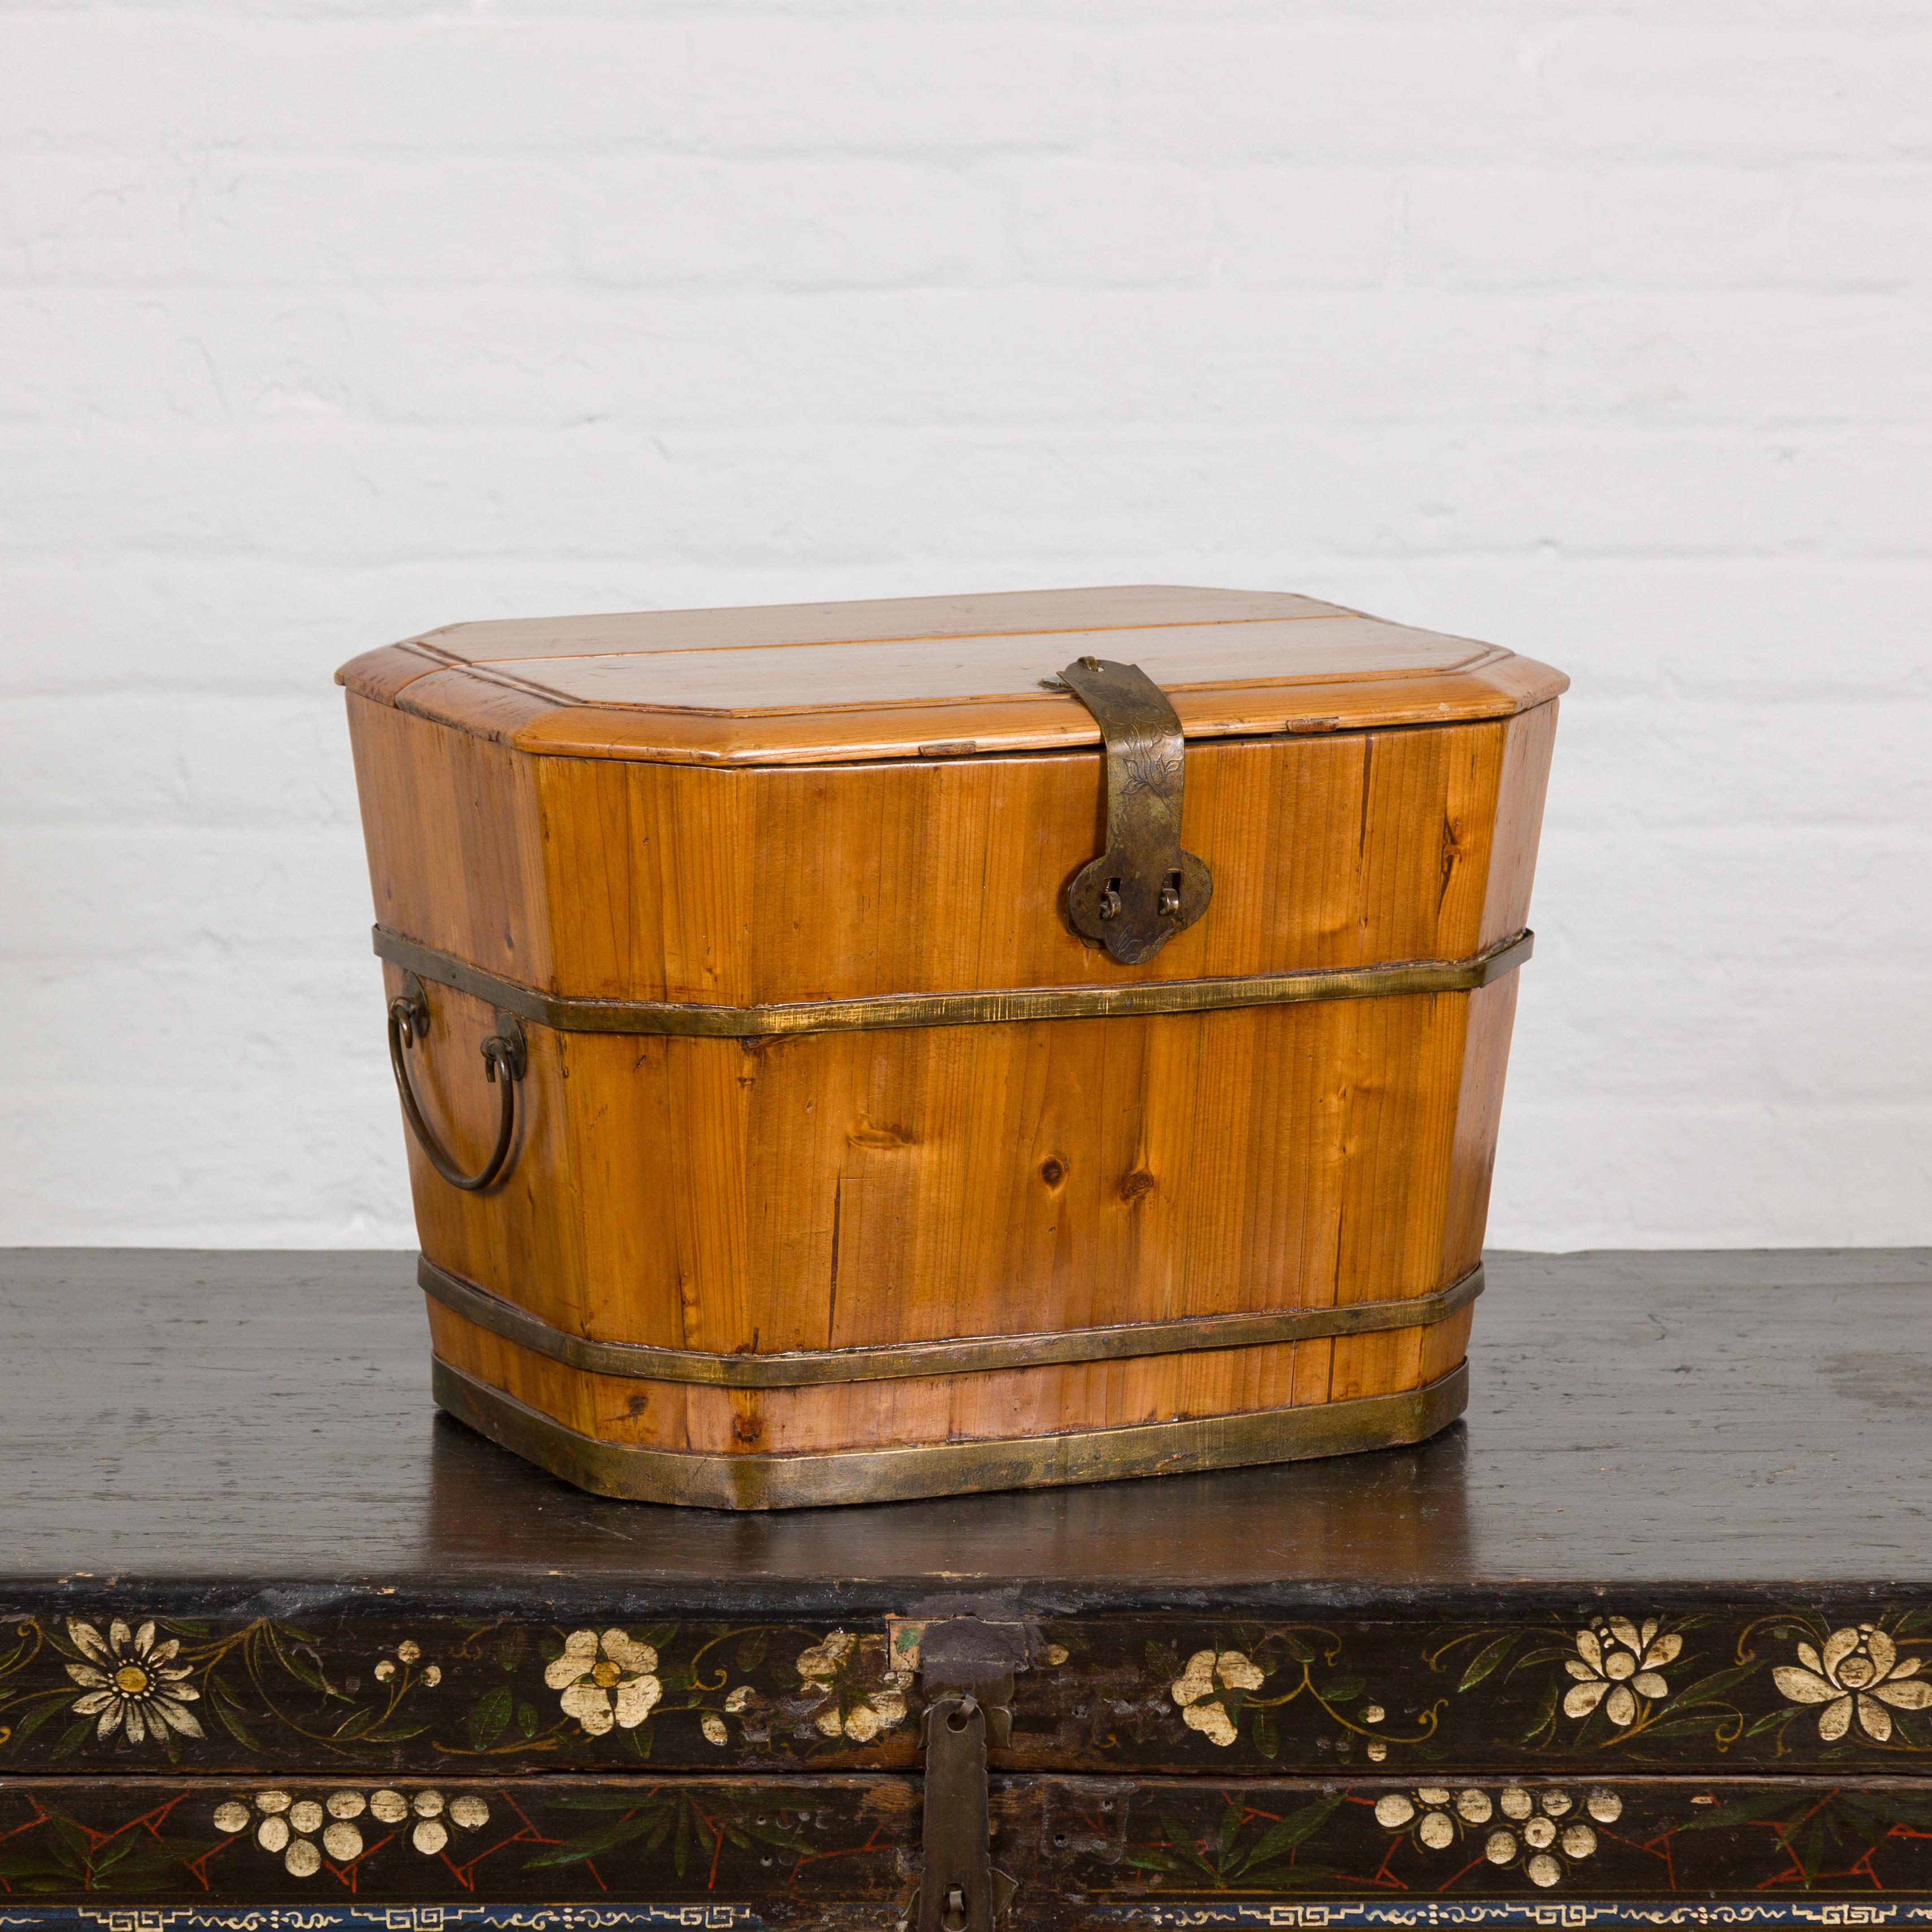 Late Qing Dynasty Wood and Brass Lidded Box with Lateral Handles For Sale 7